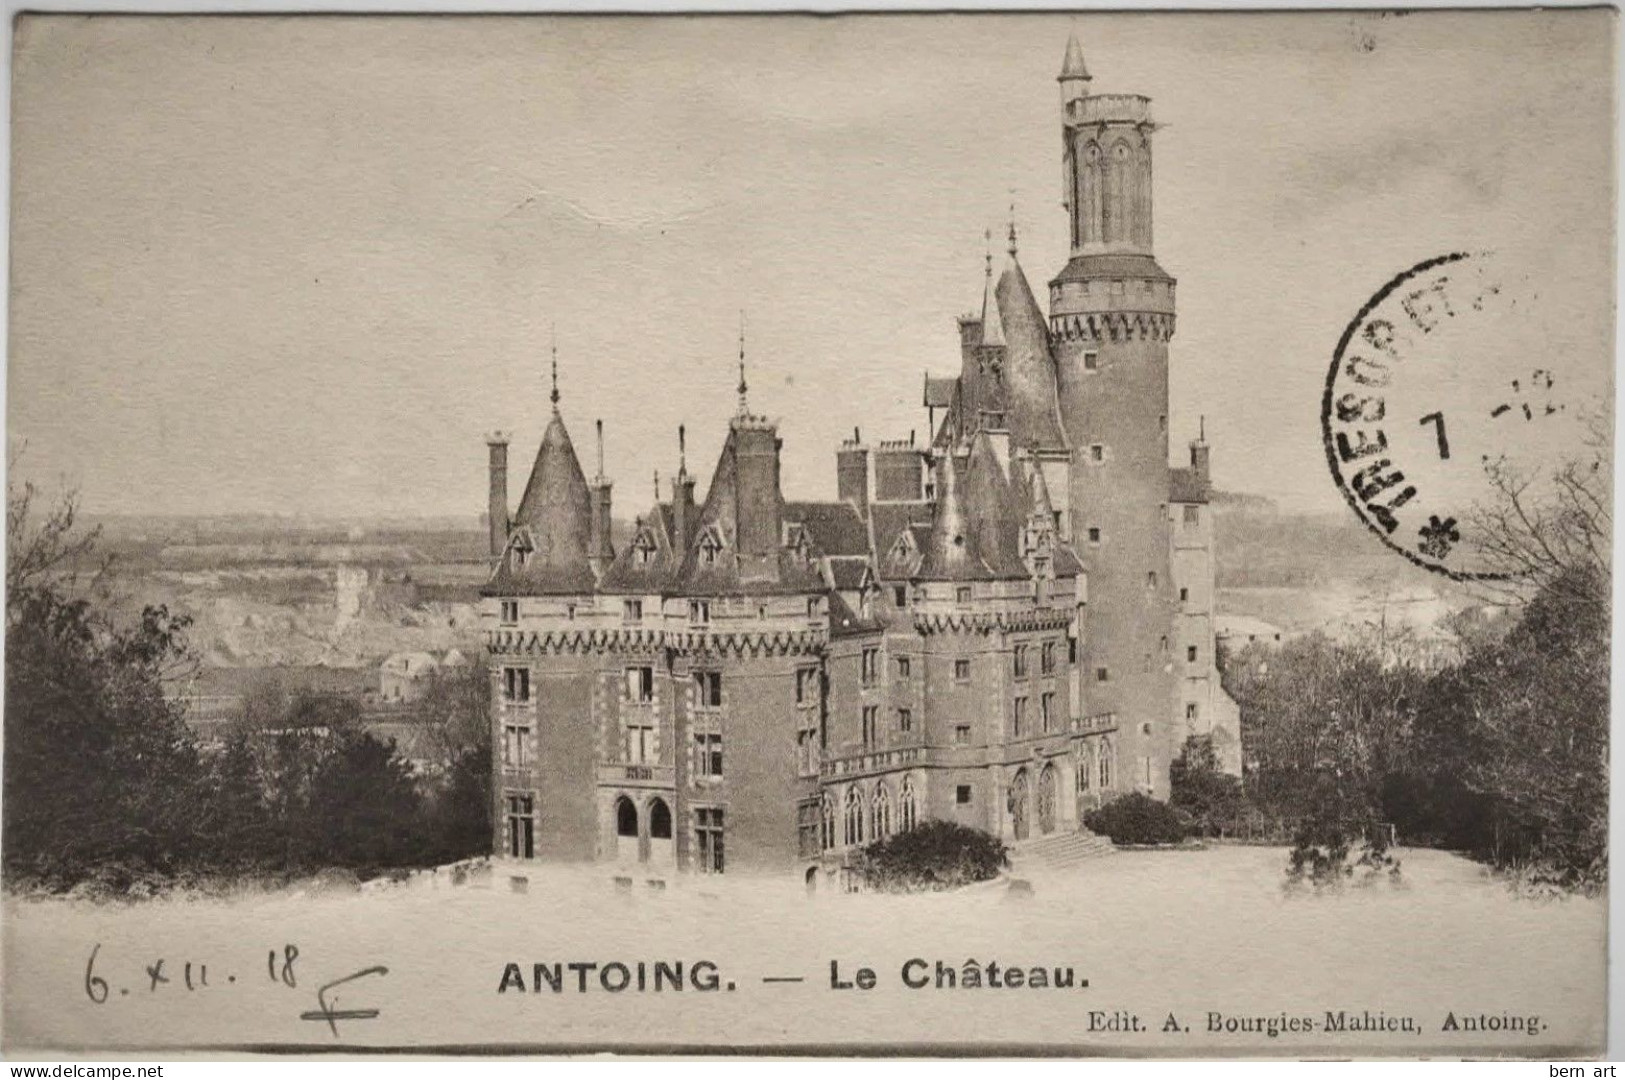 CPA.- ANTOING.- Le Château. N°: Sans. Edit.: A. Bourgies - Mathieu, Antoing. - Antoing